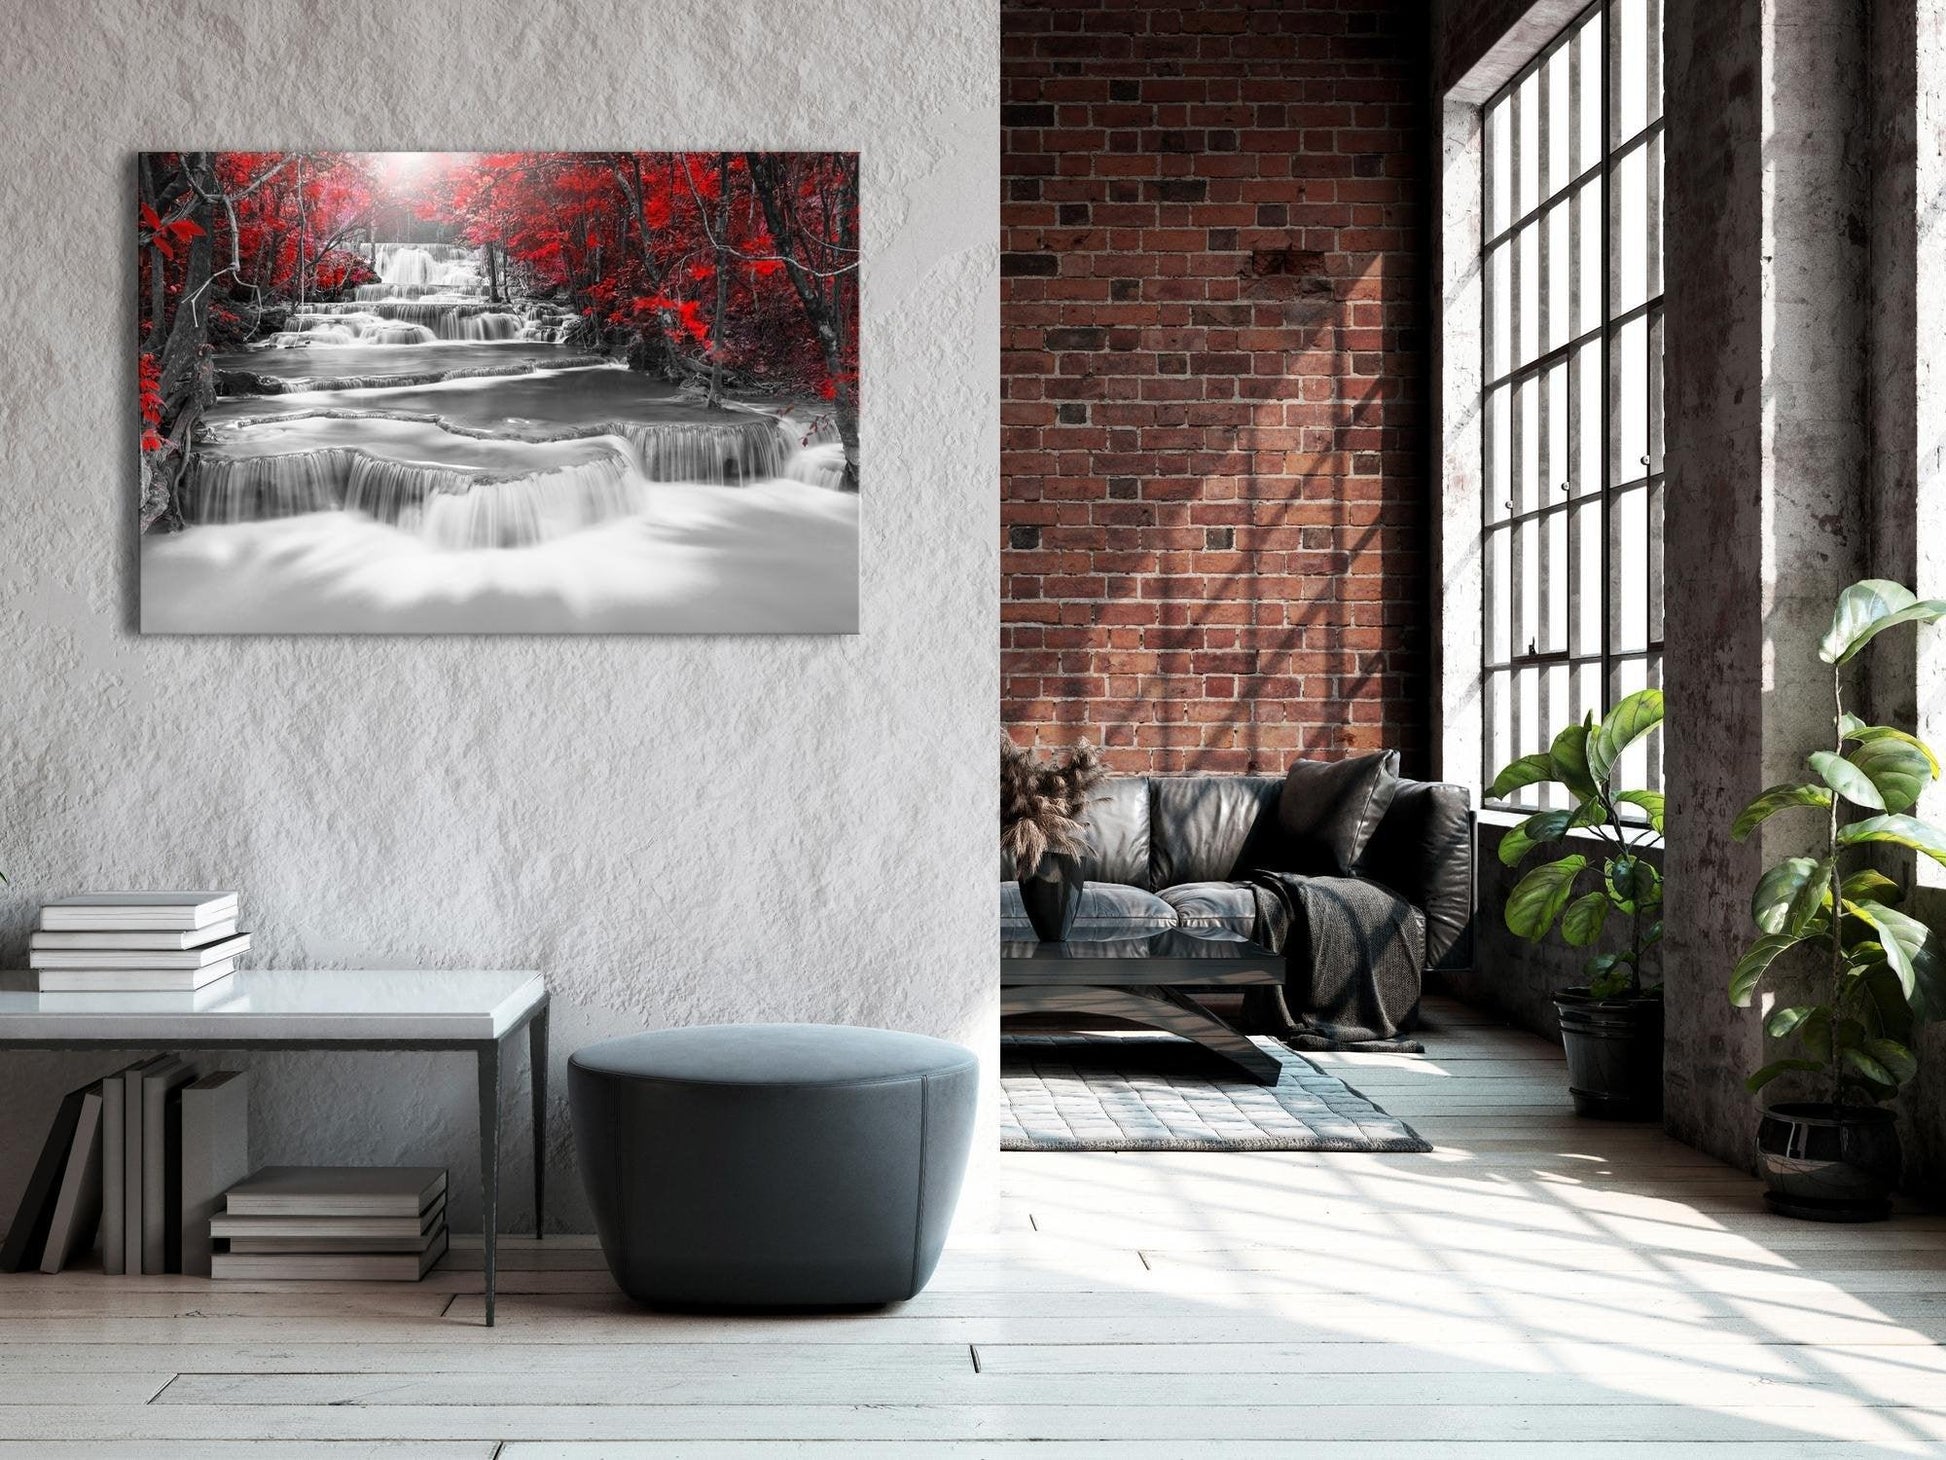 Canvas Print - Cascade of Thoughts (1 Part) Wide Red - www.trendingbestsellers.com